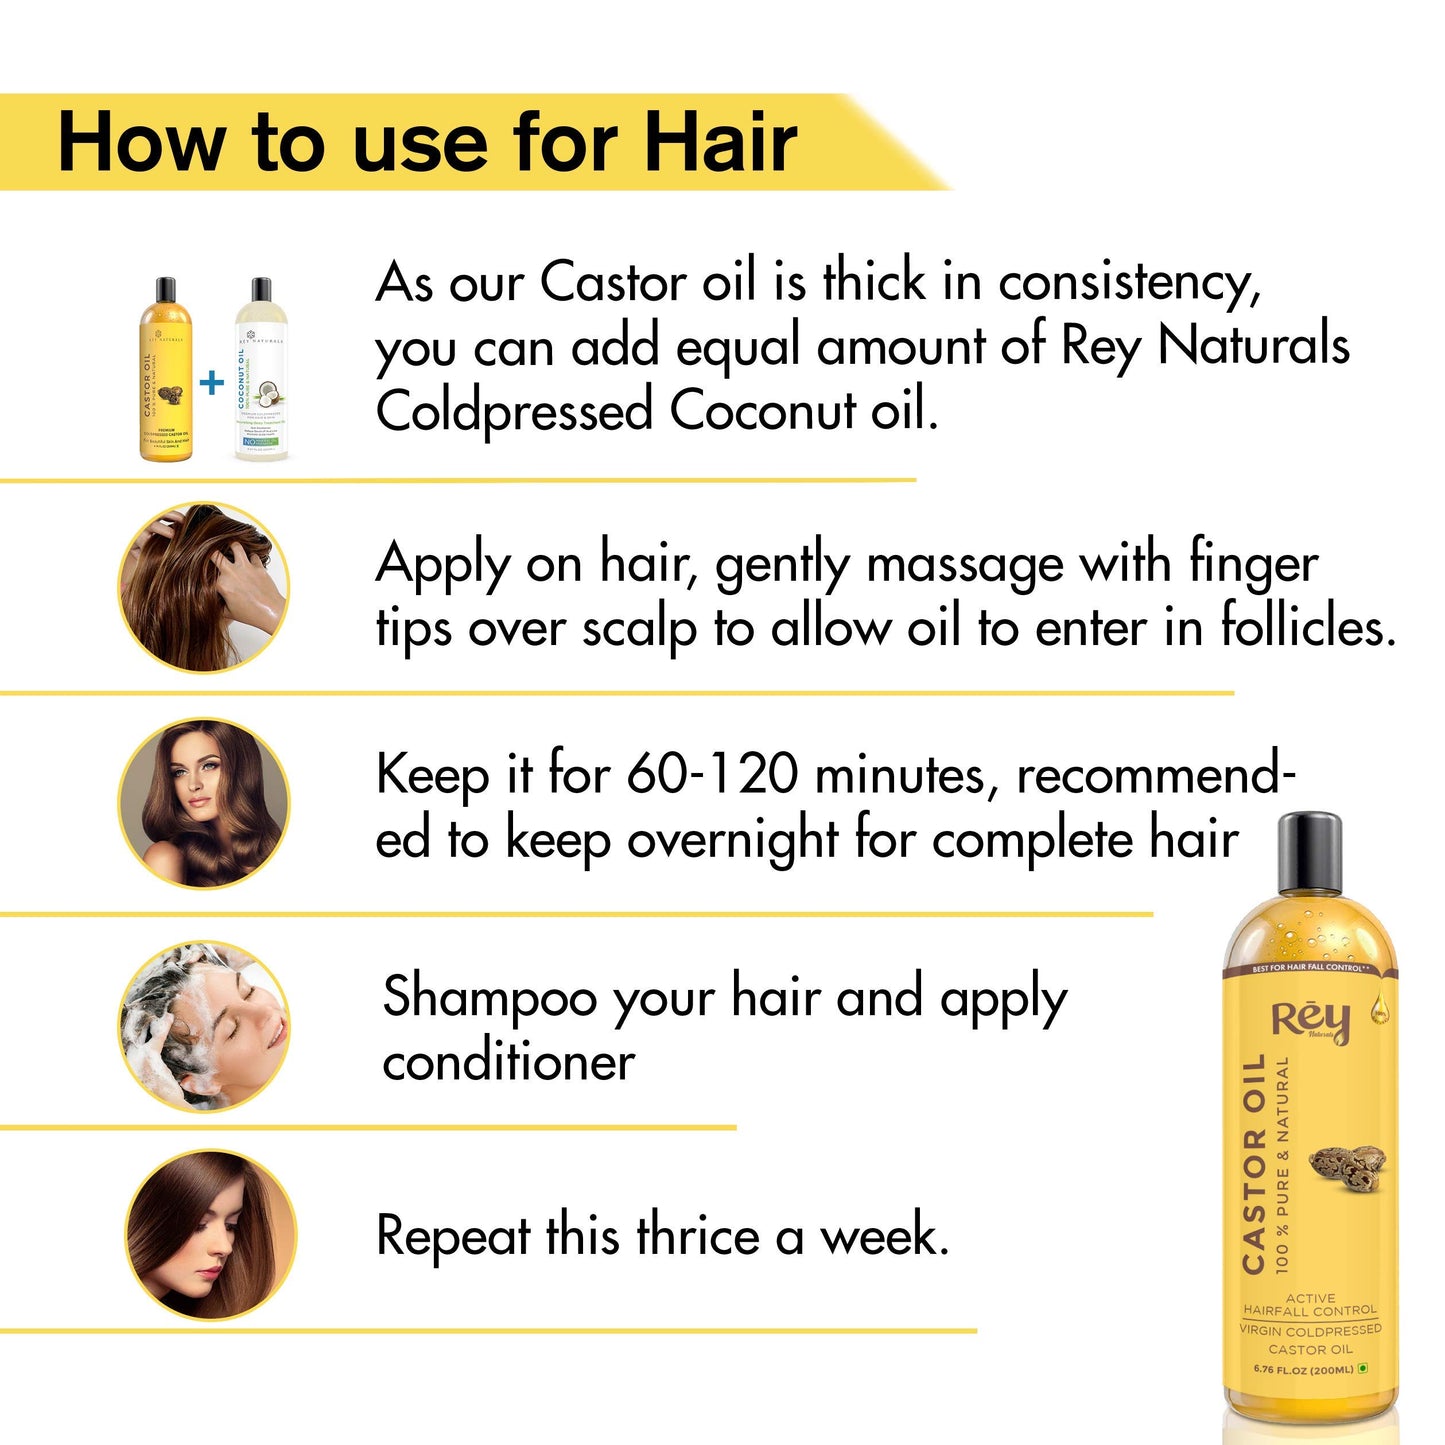 Rey Naturals Cold Pressed Extra Virgin Castor Oil For Hair Growth | Nourishing Hair Oil For All Hair Types | Deeply Moisturizes, Repairs And Strengthens Hair | For Hair Growth And Adds Shine - 200ml